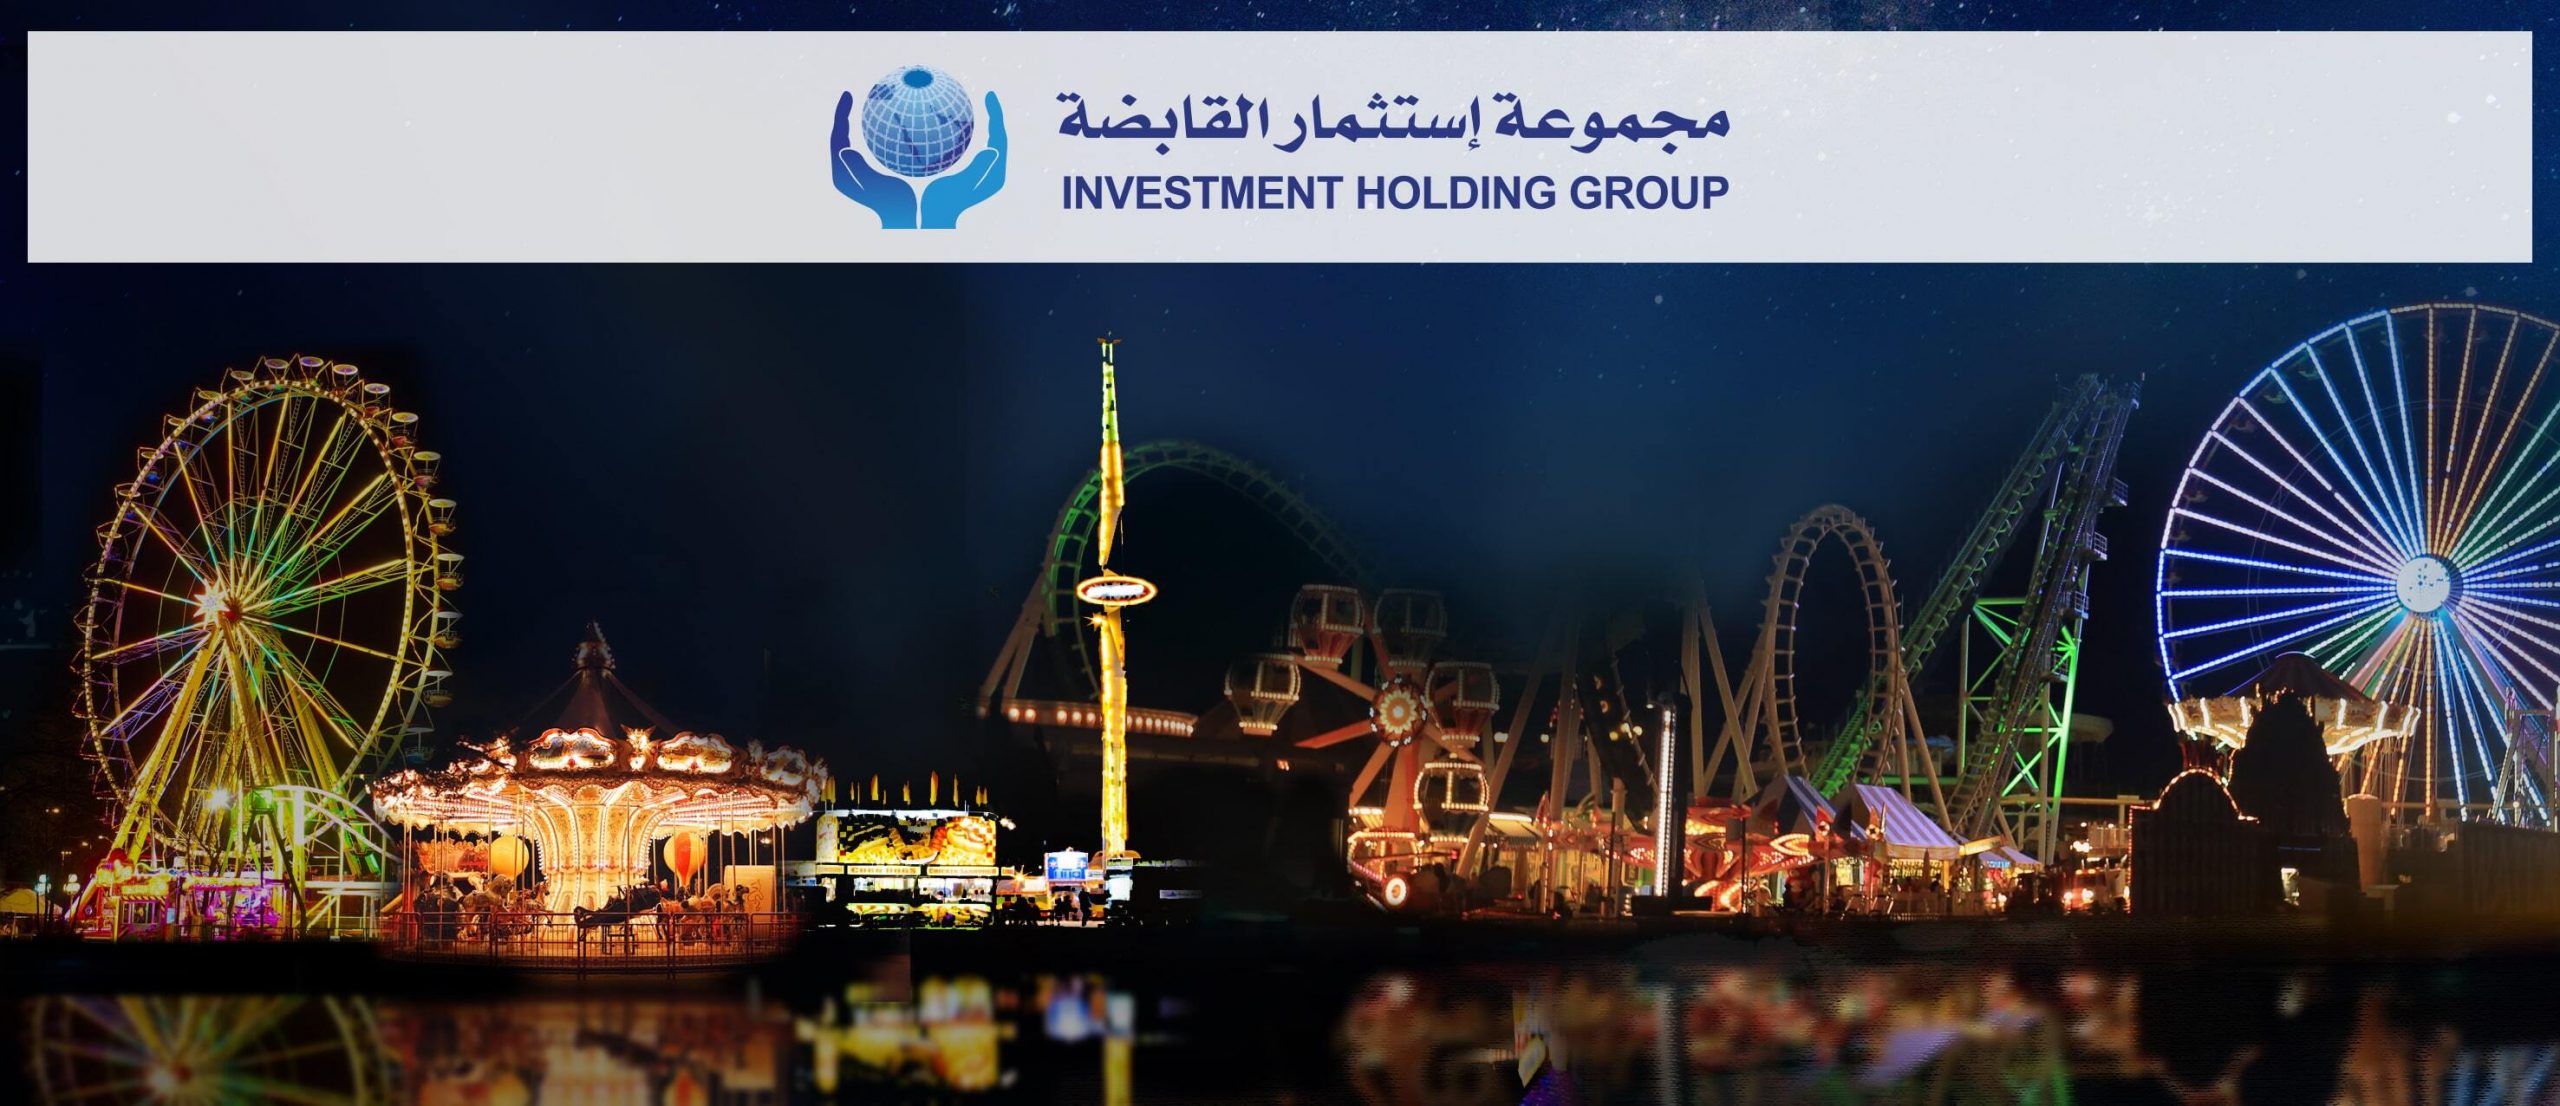 Investment Holding Group Reveals Al Maha Island A new destination in Lusail to welcome guests before FIFA World Cup 